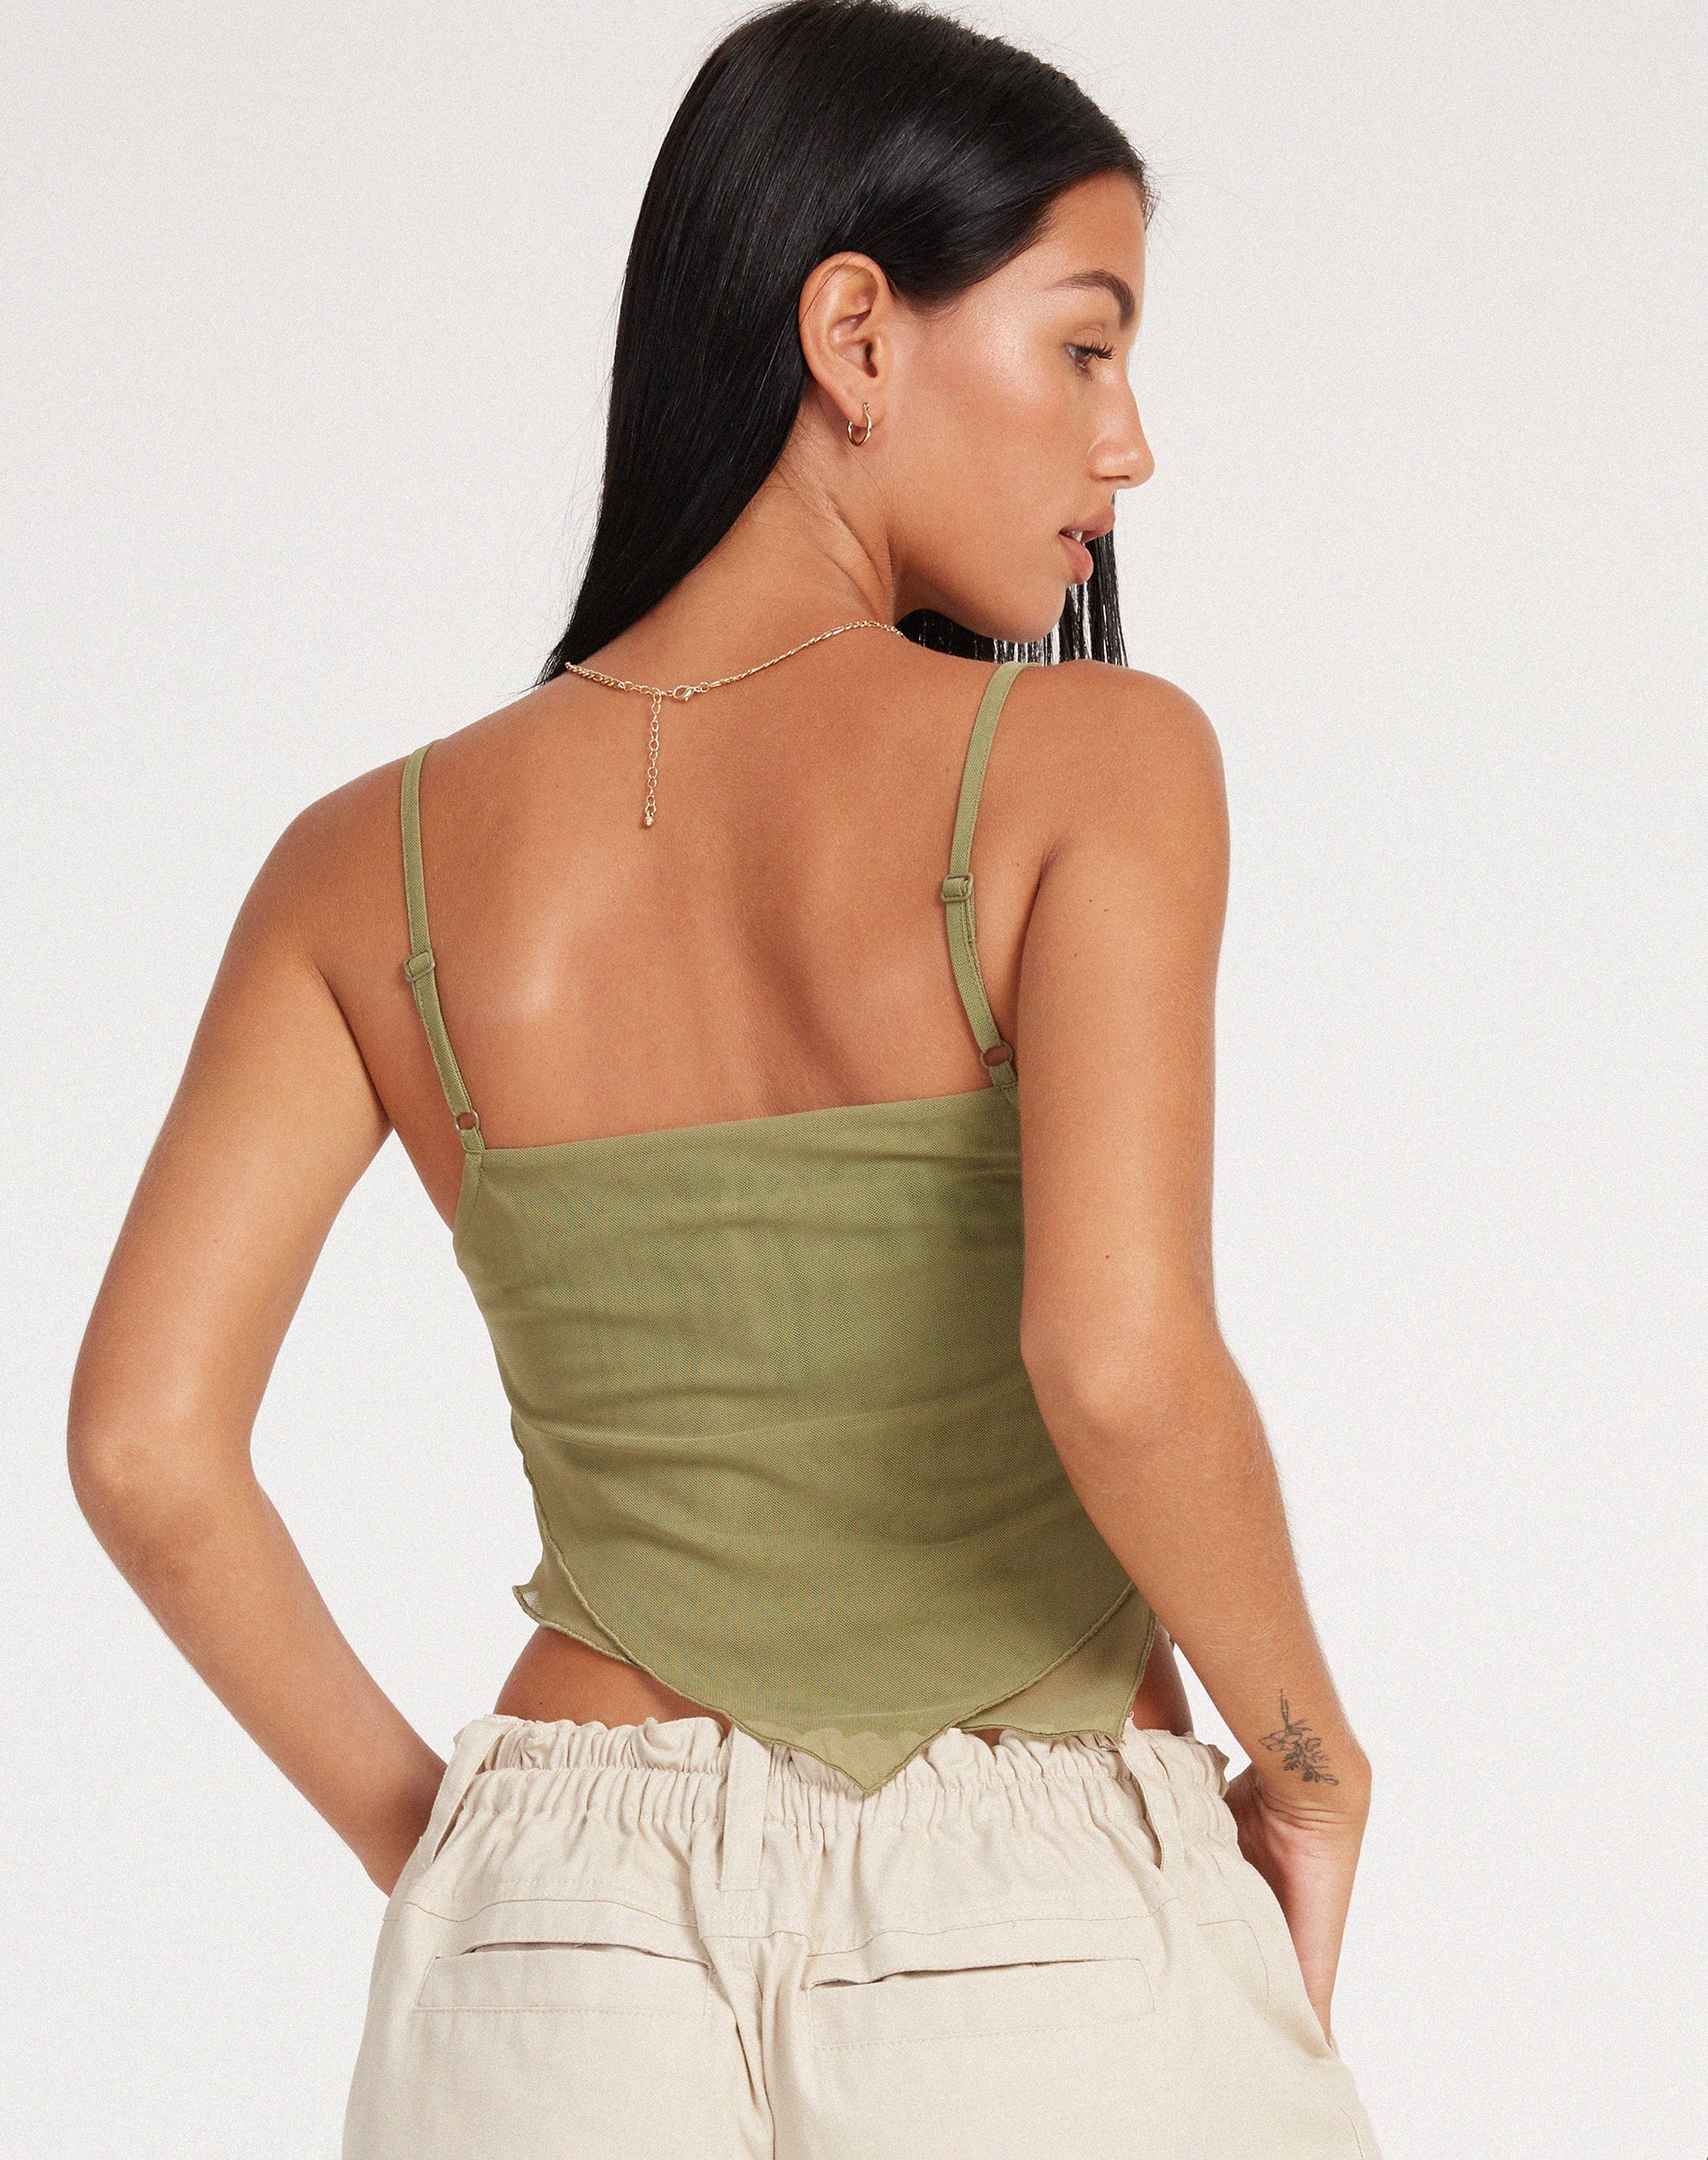 image of Shindu Top in Mesh Olive